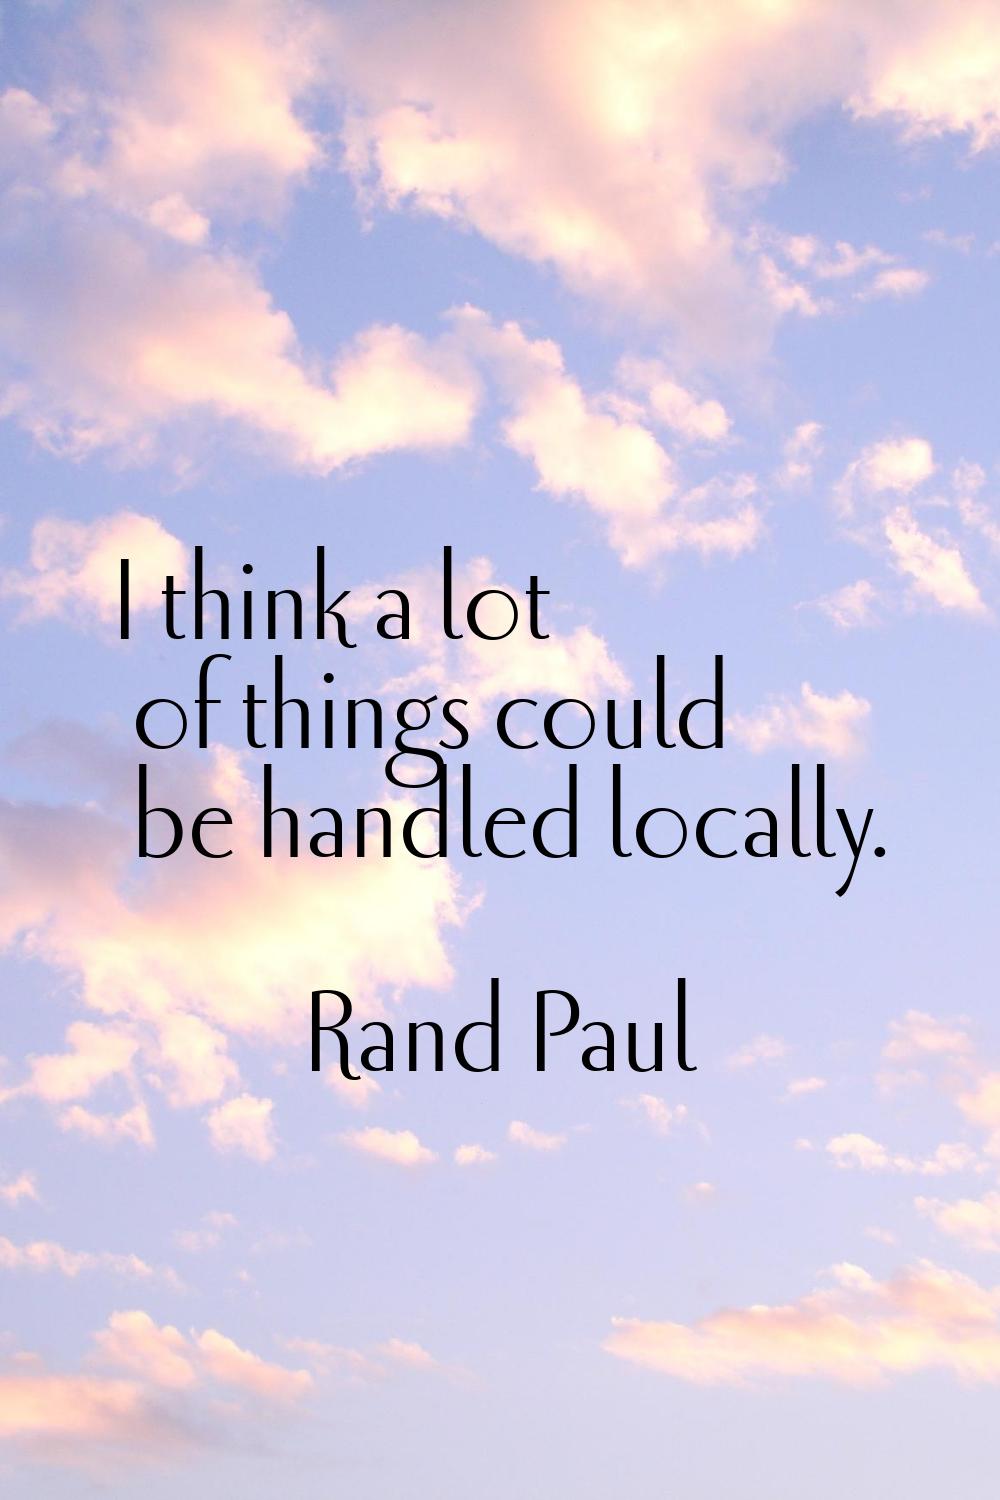 I think a lot of things could be handled locally.